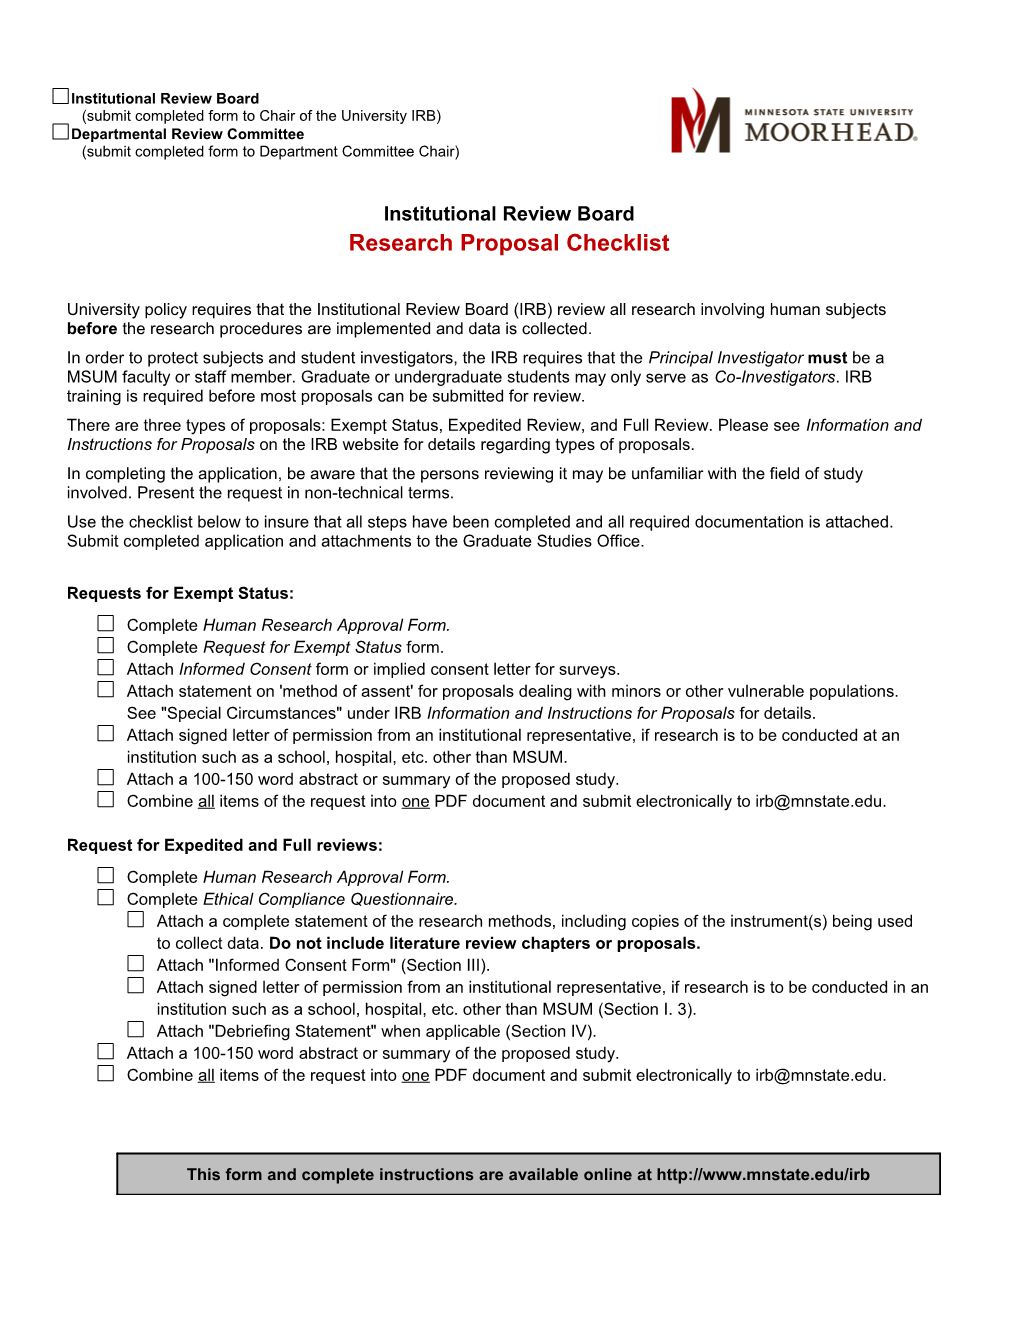 Institutional Review Board Research Proposal Checklist